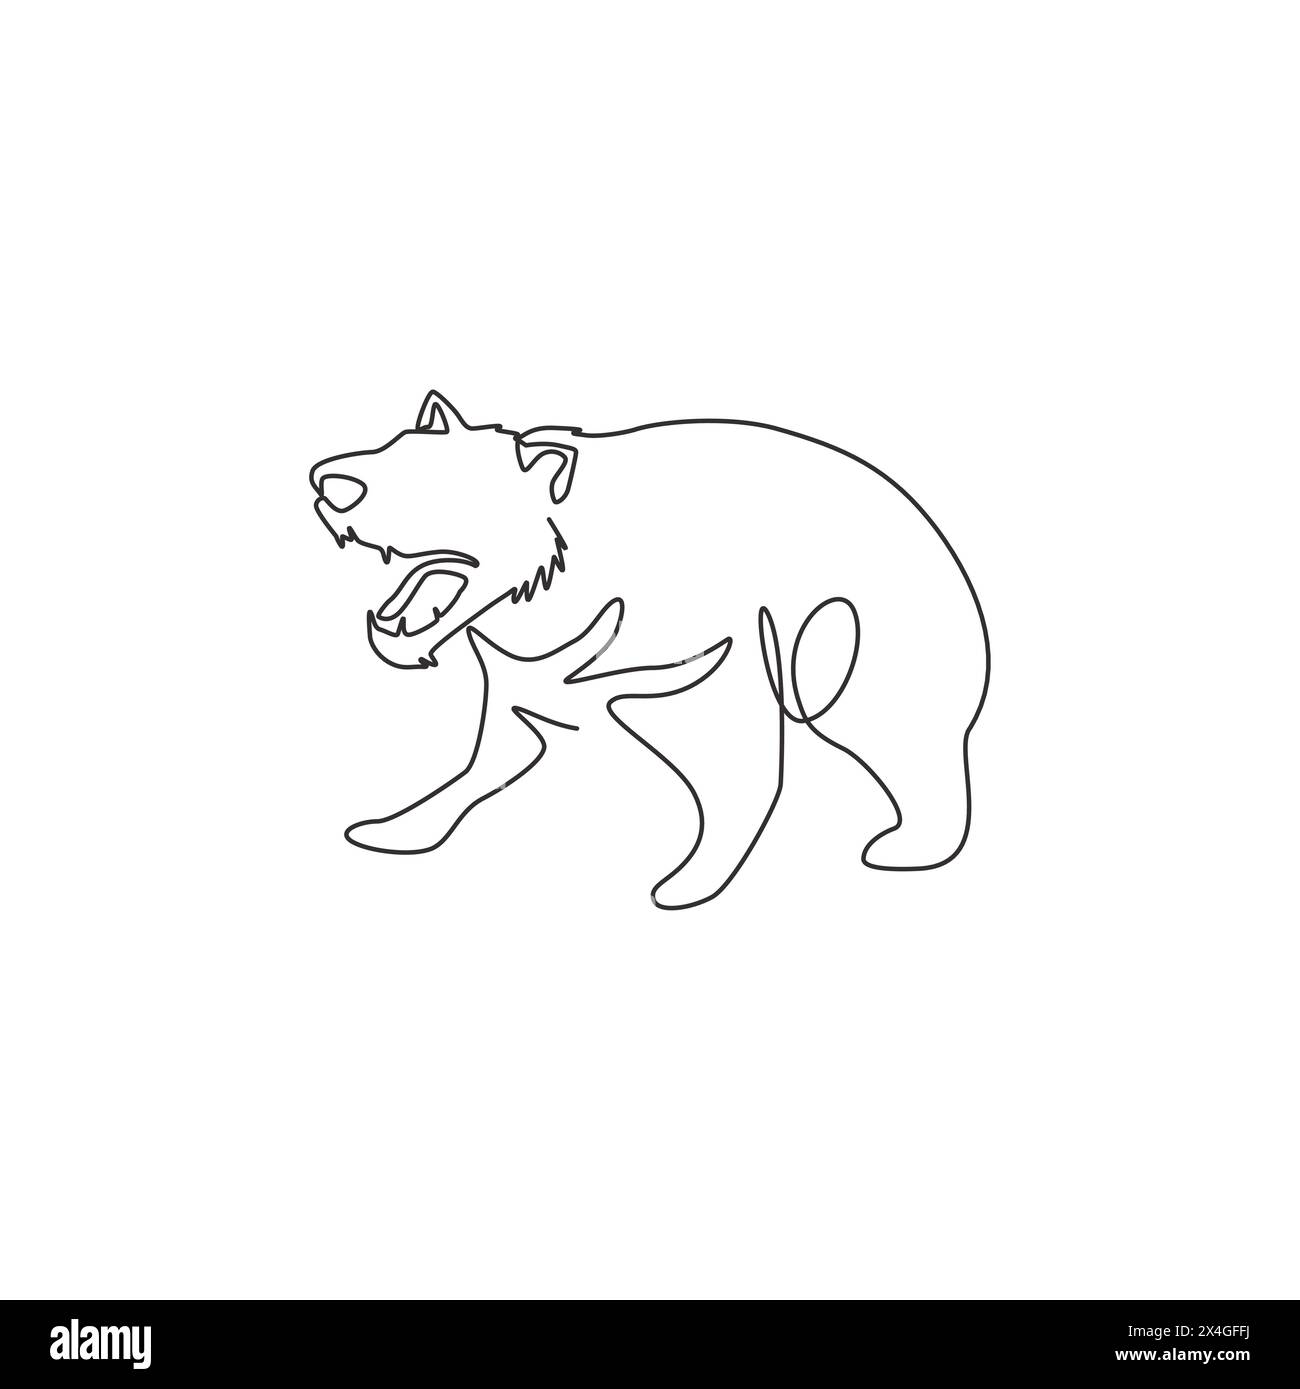 Single one line drawing of furious tasmanian devil for organisation logo identity. Tasmanian island mascot concept for tourist attractor icon. Modern Stock Vector